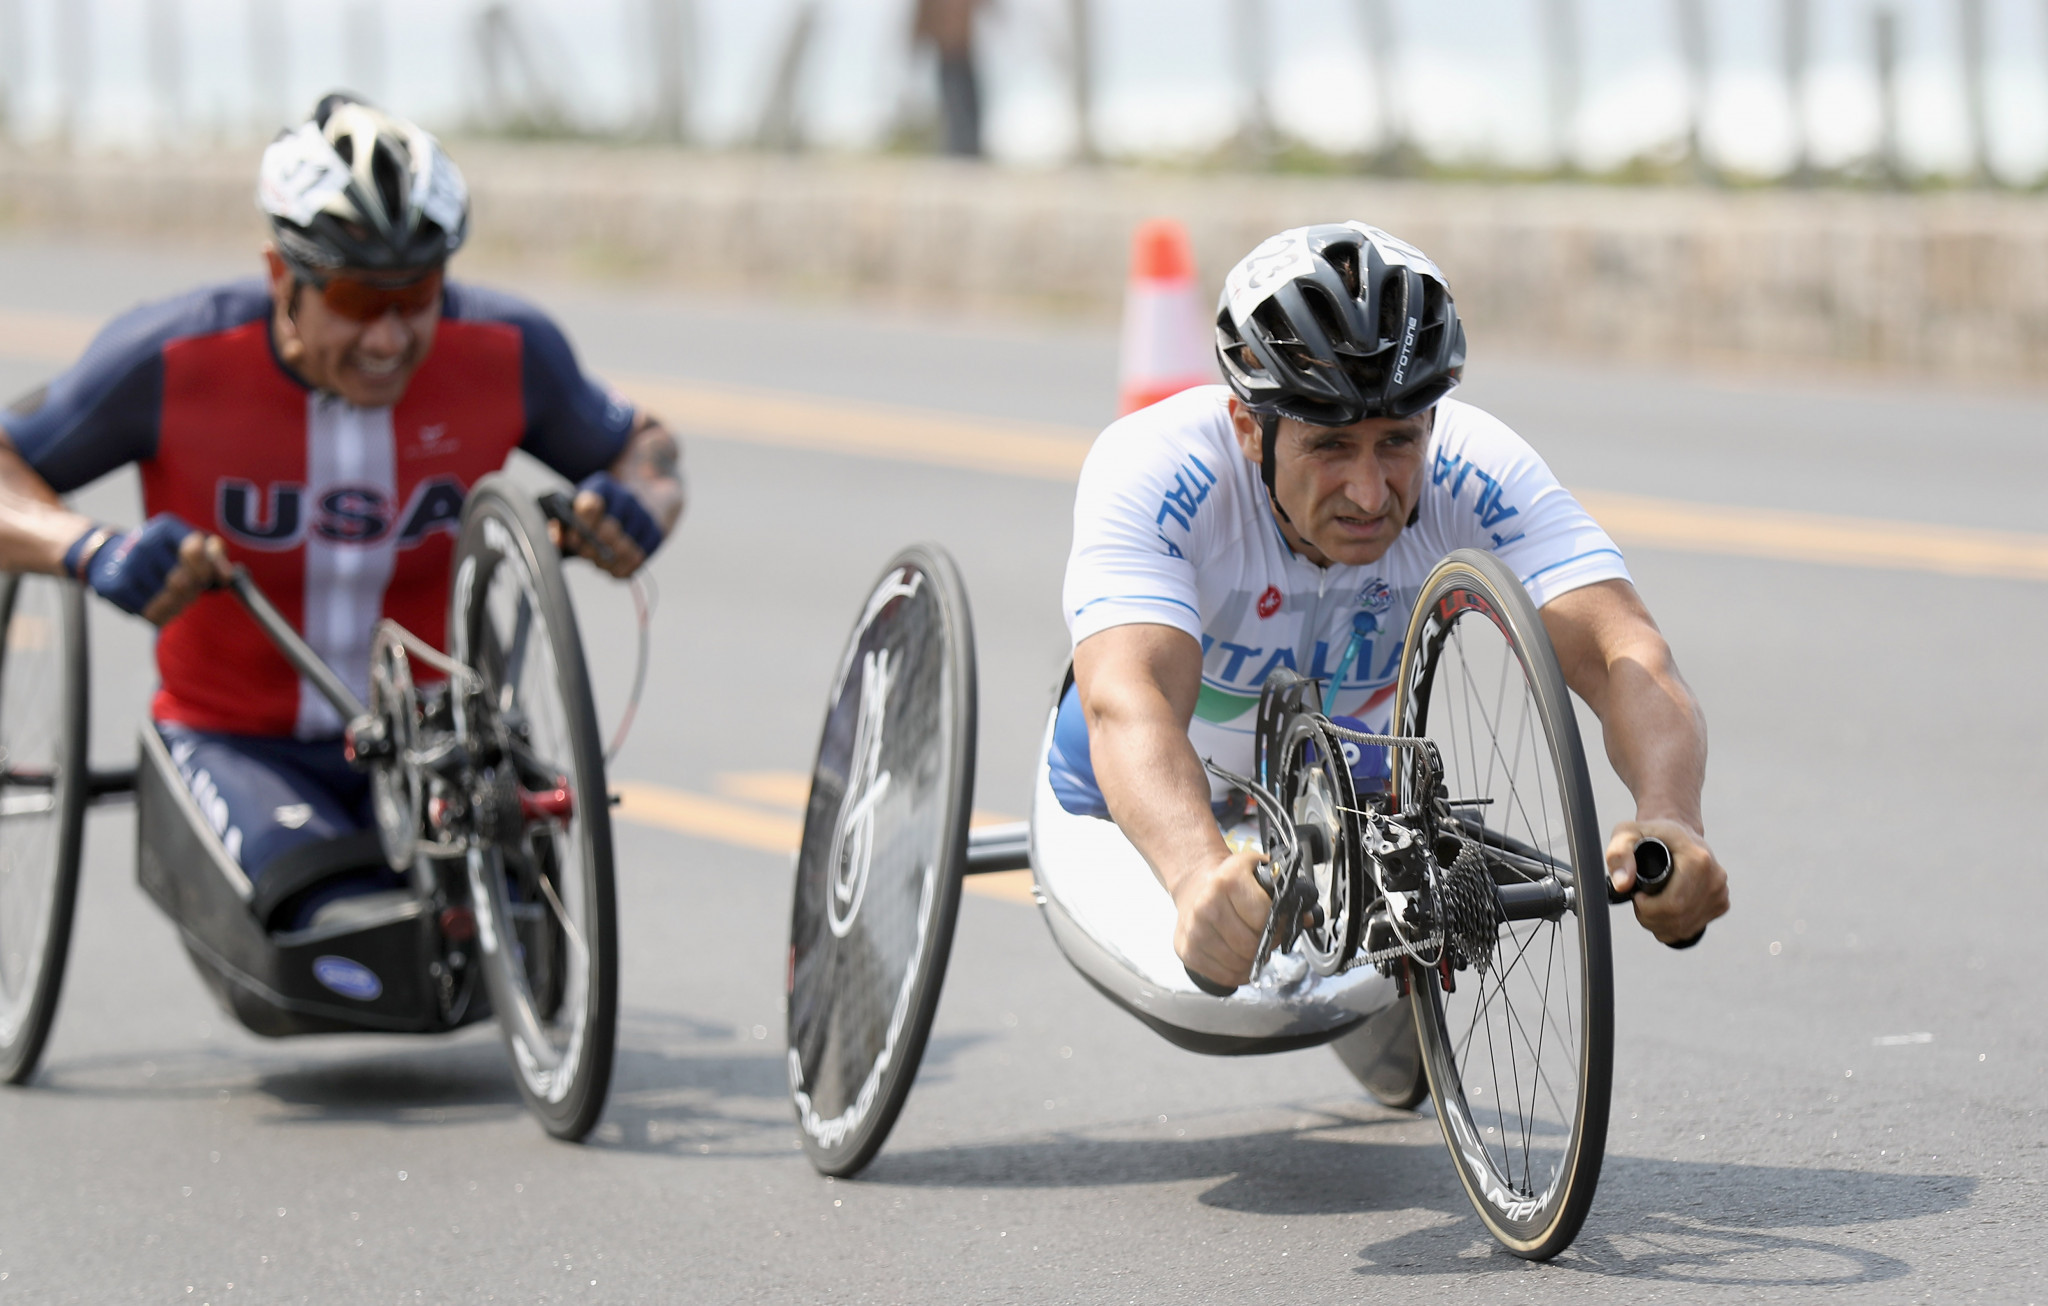 Alex Zanardi won double gold in Para-cycling at both the London 2012 and Rio 2016 Paralympic Games ©Getty Images